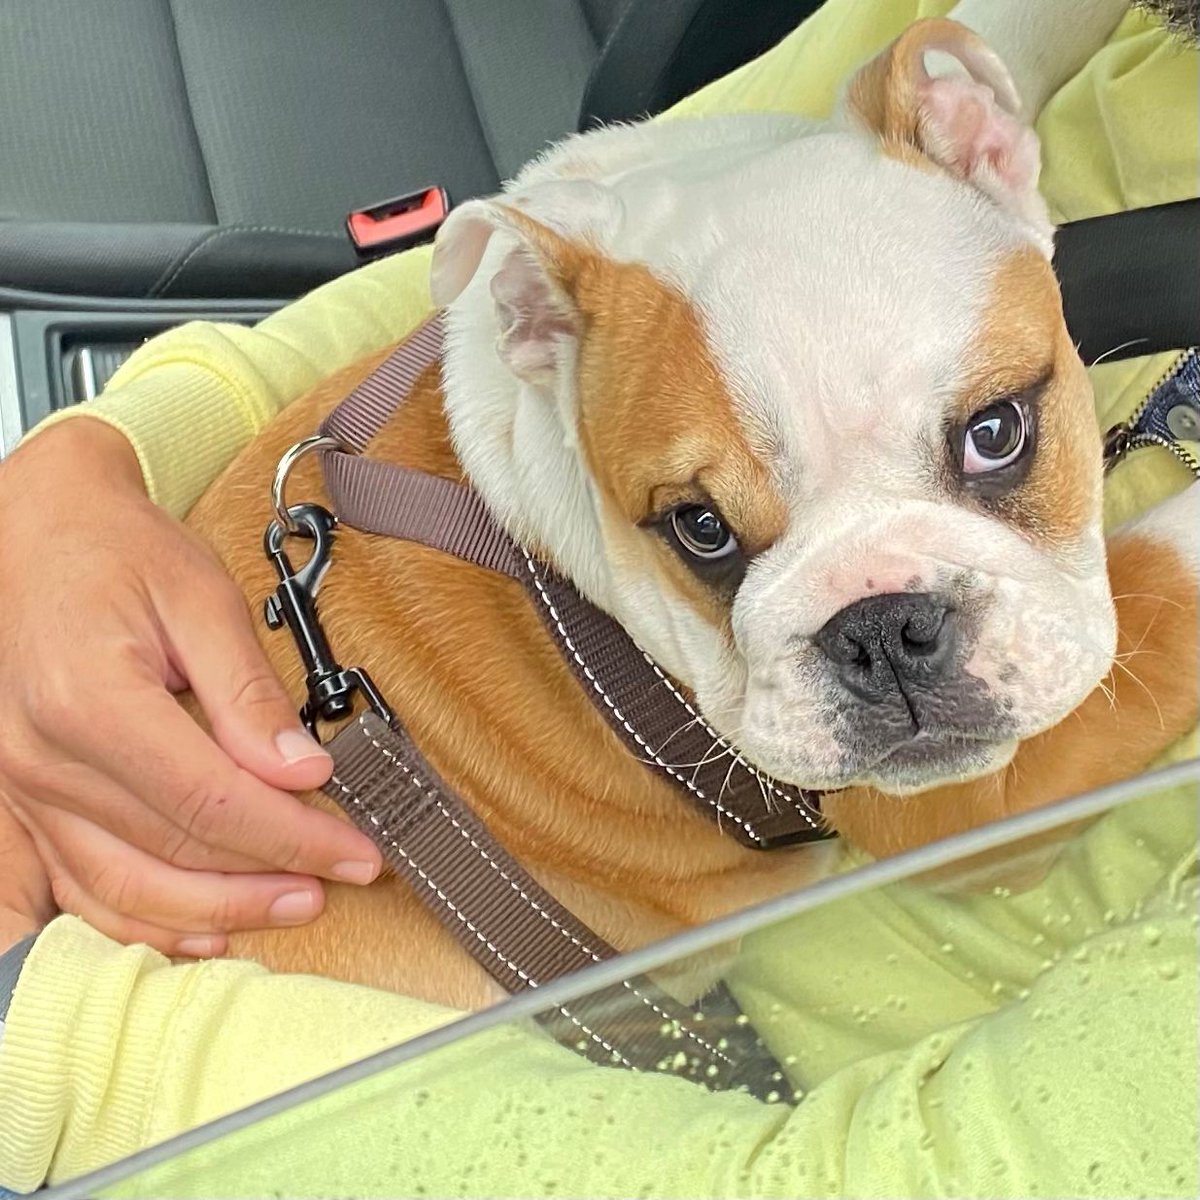 So I’ve been to the vet recently for my 4th annual check up and boosters, but for #ThrowbackThursday here I am, not wanting to leave the car for the last of my #Puppy boosters 💉 🐶🐾❤️ Barney #BarneyTheBulldog #DogsOfTwitter #DogsOfX #DogsOfIG #DogsOfFacebook #EnglishBulldog